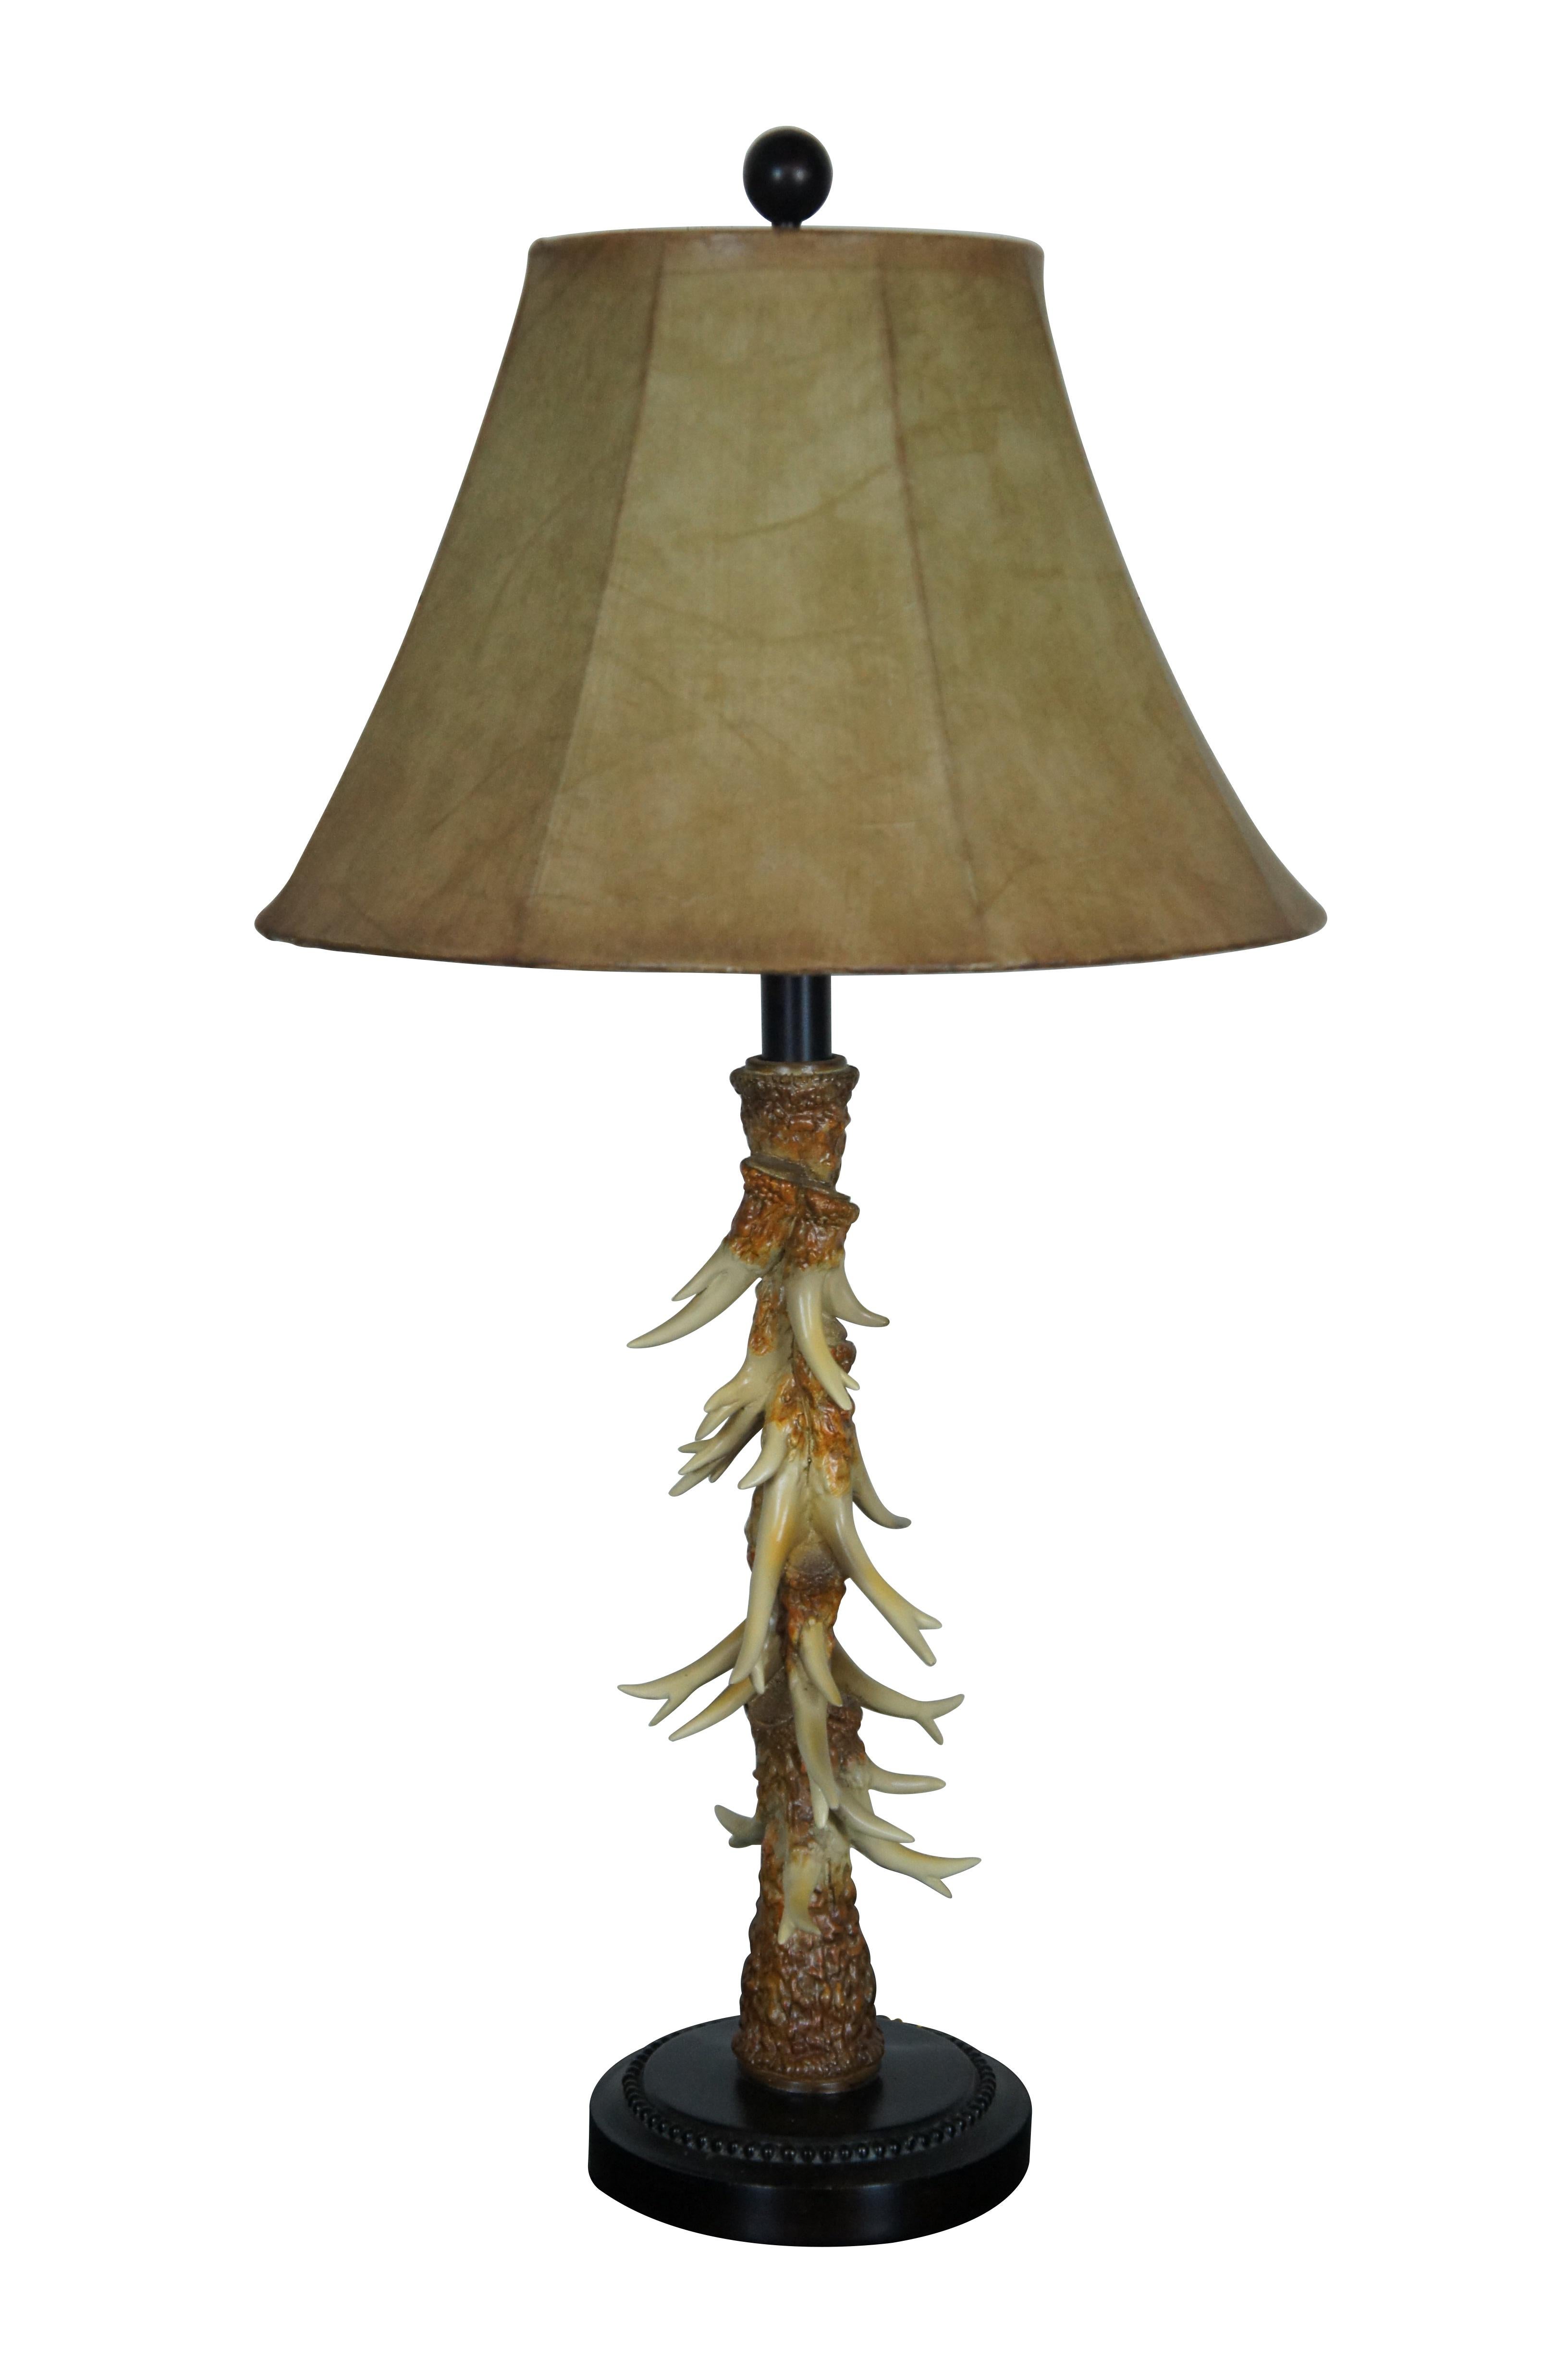 Two vintage hunting / cabin theme table lamps. Made of resin featuring faux antler body with hide style shades and turned wood base.

6.5” x 21” / Shade - 15” x 9” / Total Height – 29” (Width x Depth x Height)
